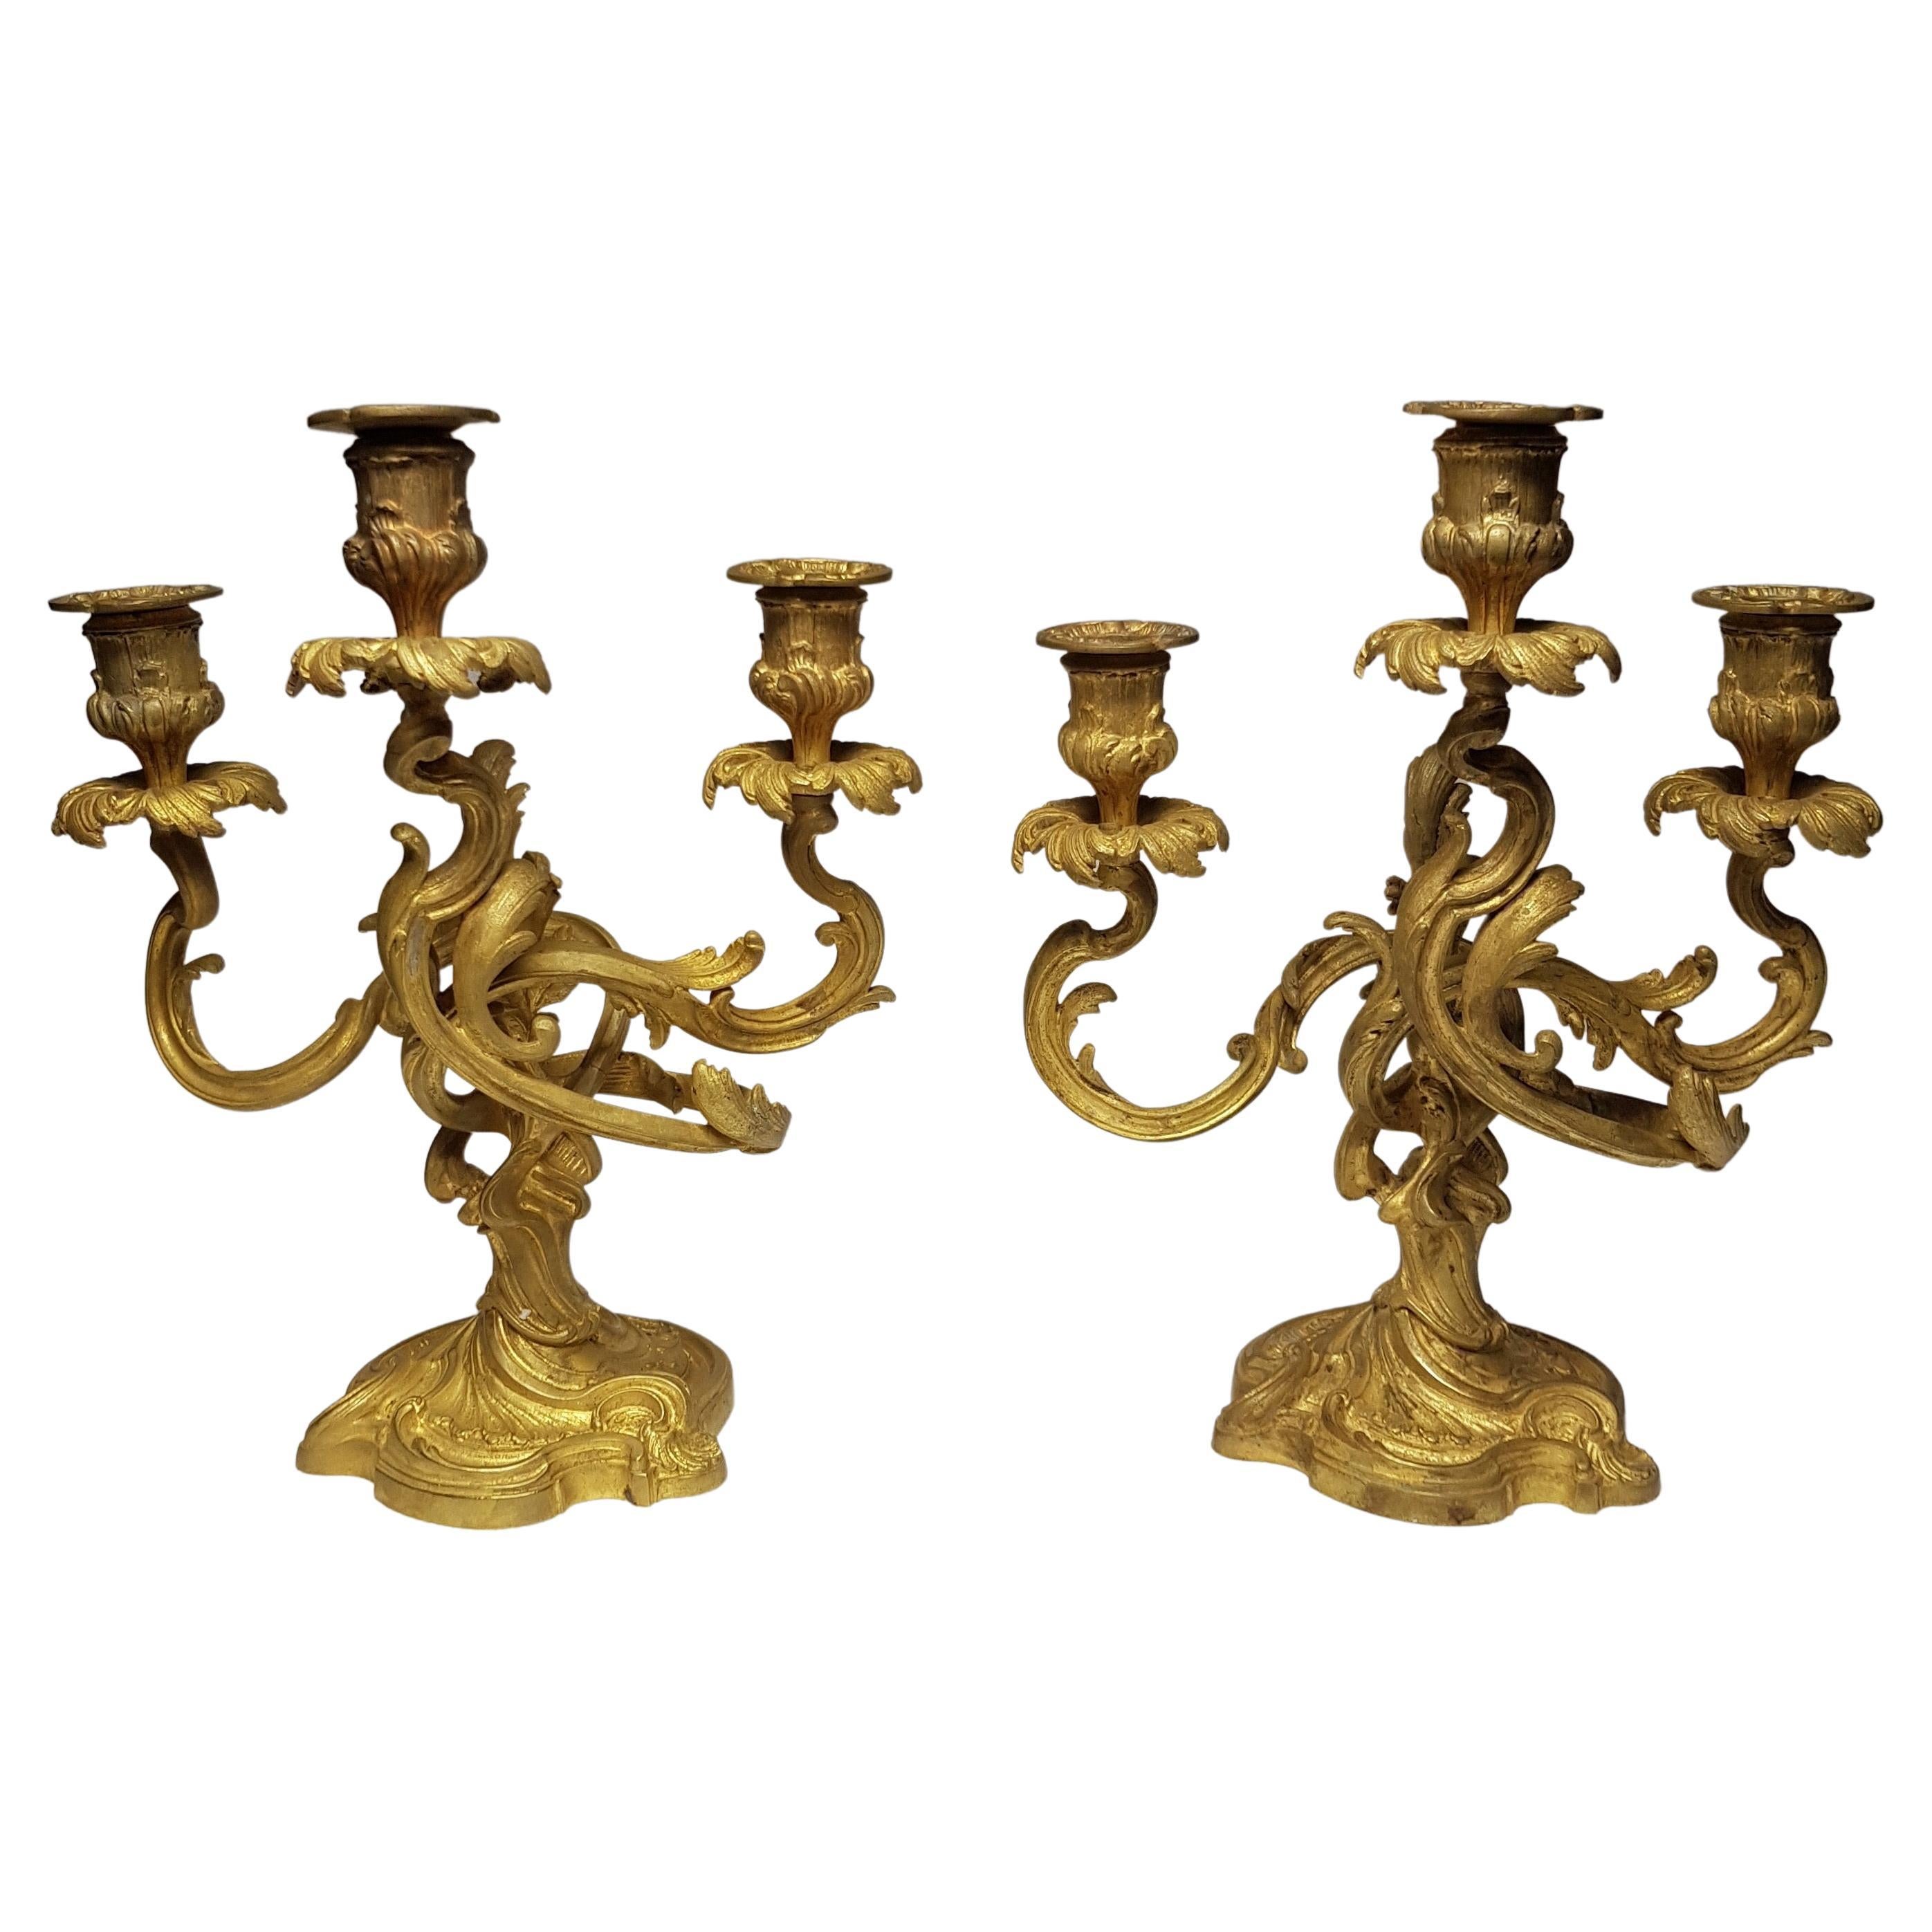 Majestic Brass Candlestick Pair, circa 1870 For Sale